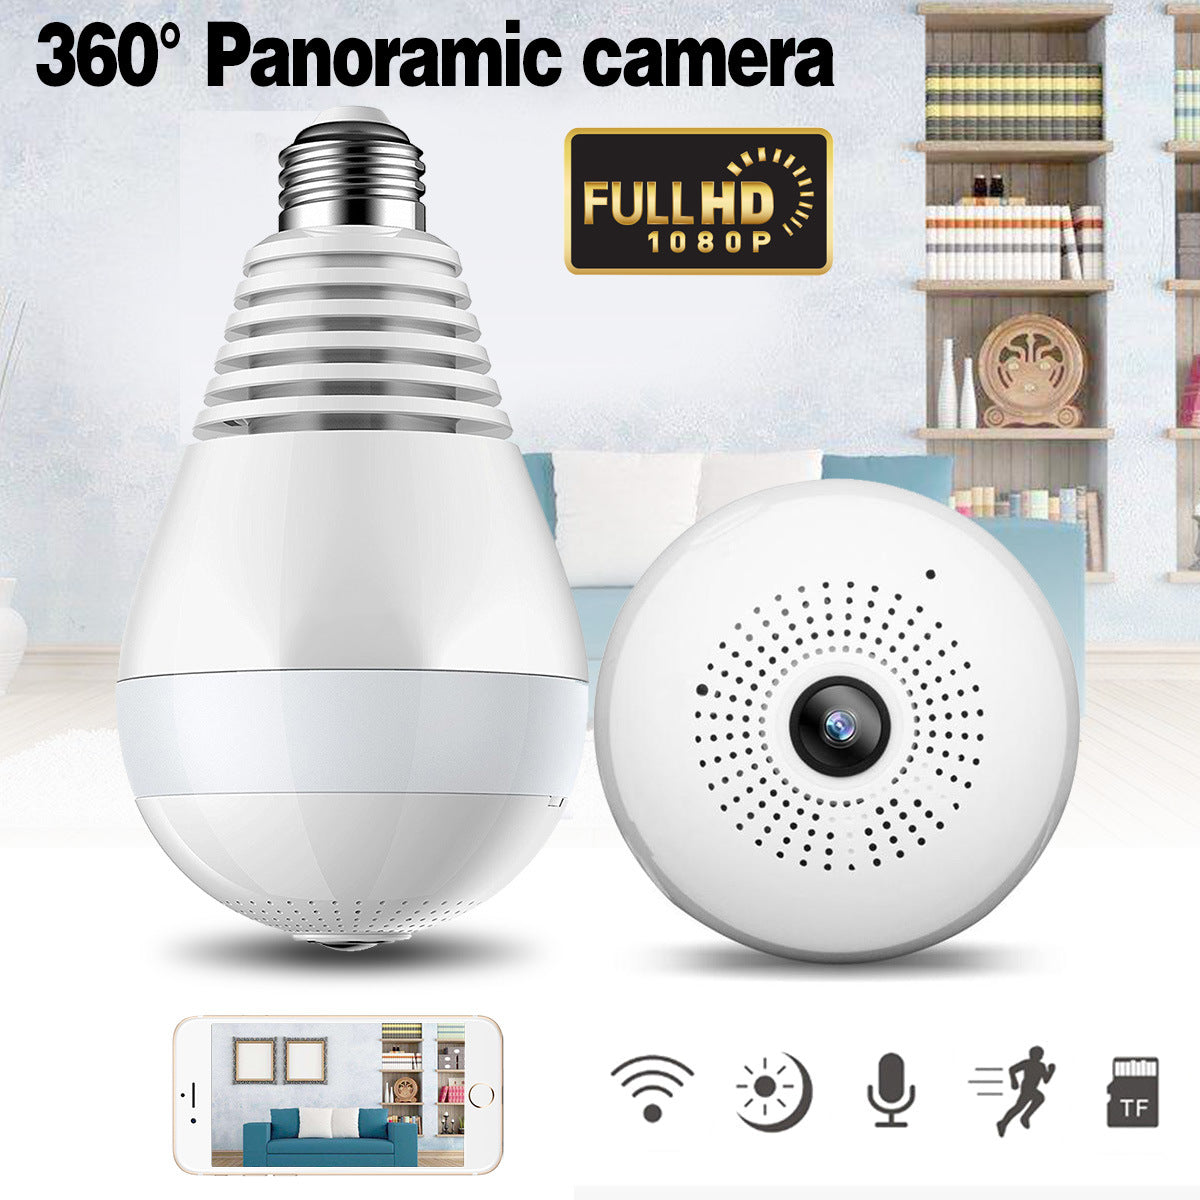 V380 Bulb Shaped Wireless Camera WIFI Remote Monitoring Network Camera Mobile Phone Home 360 Degree Panoramic Monitor 2 million (1080P) pixels ZopiStyle